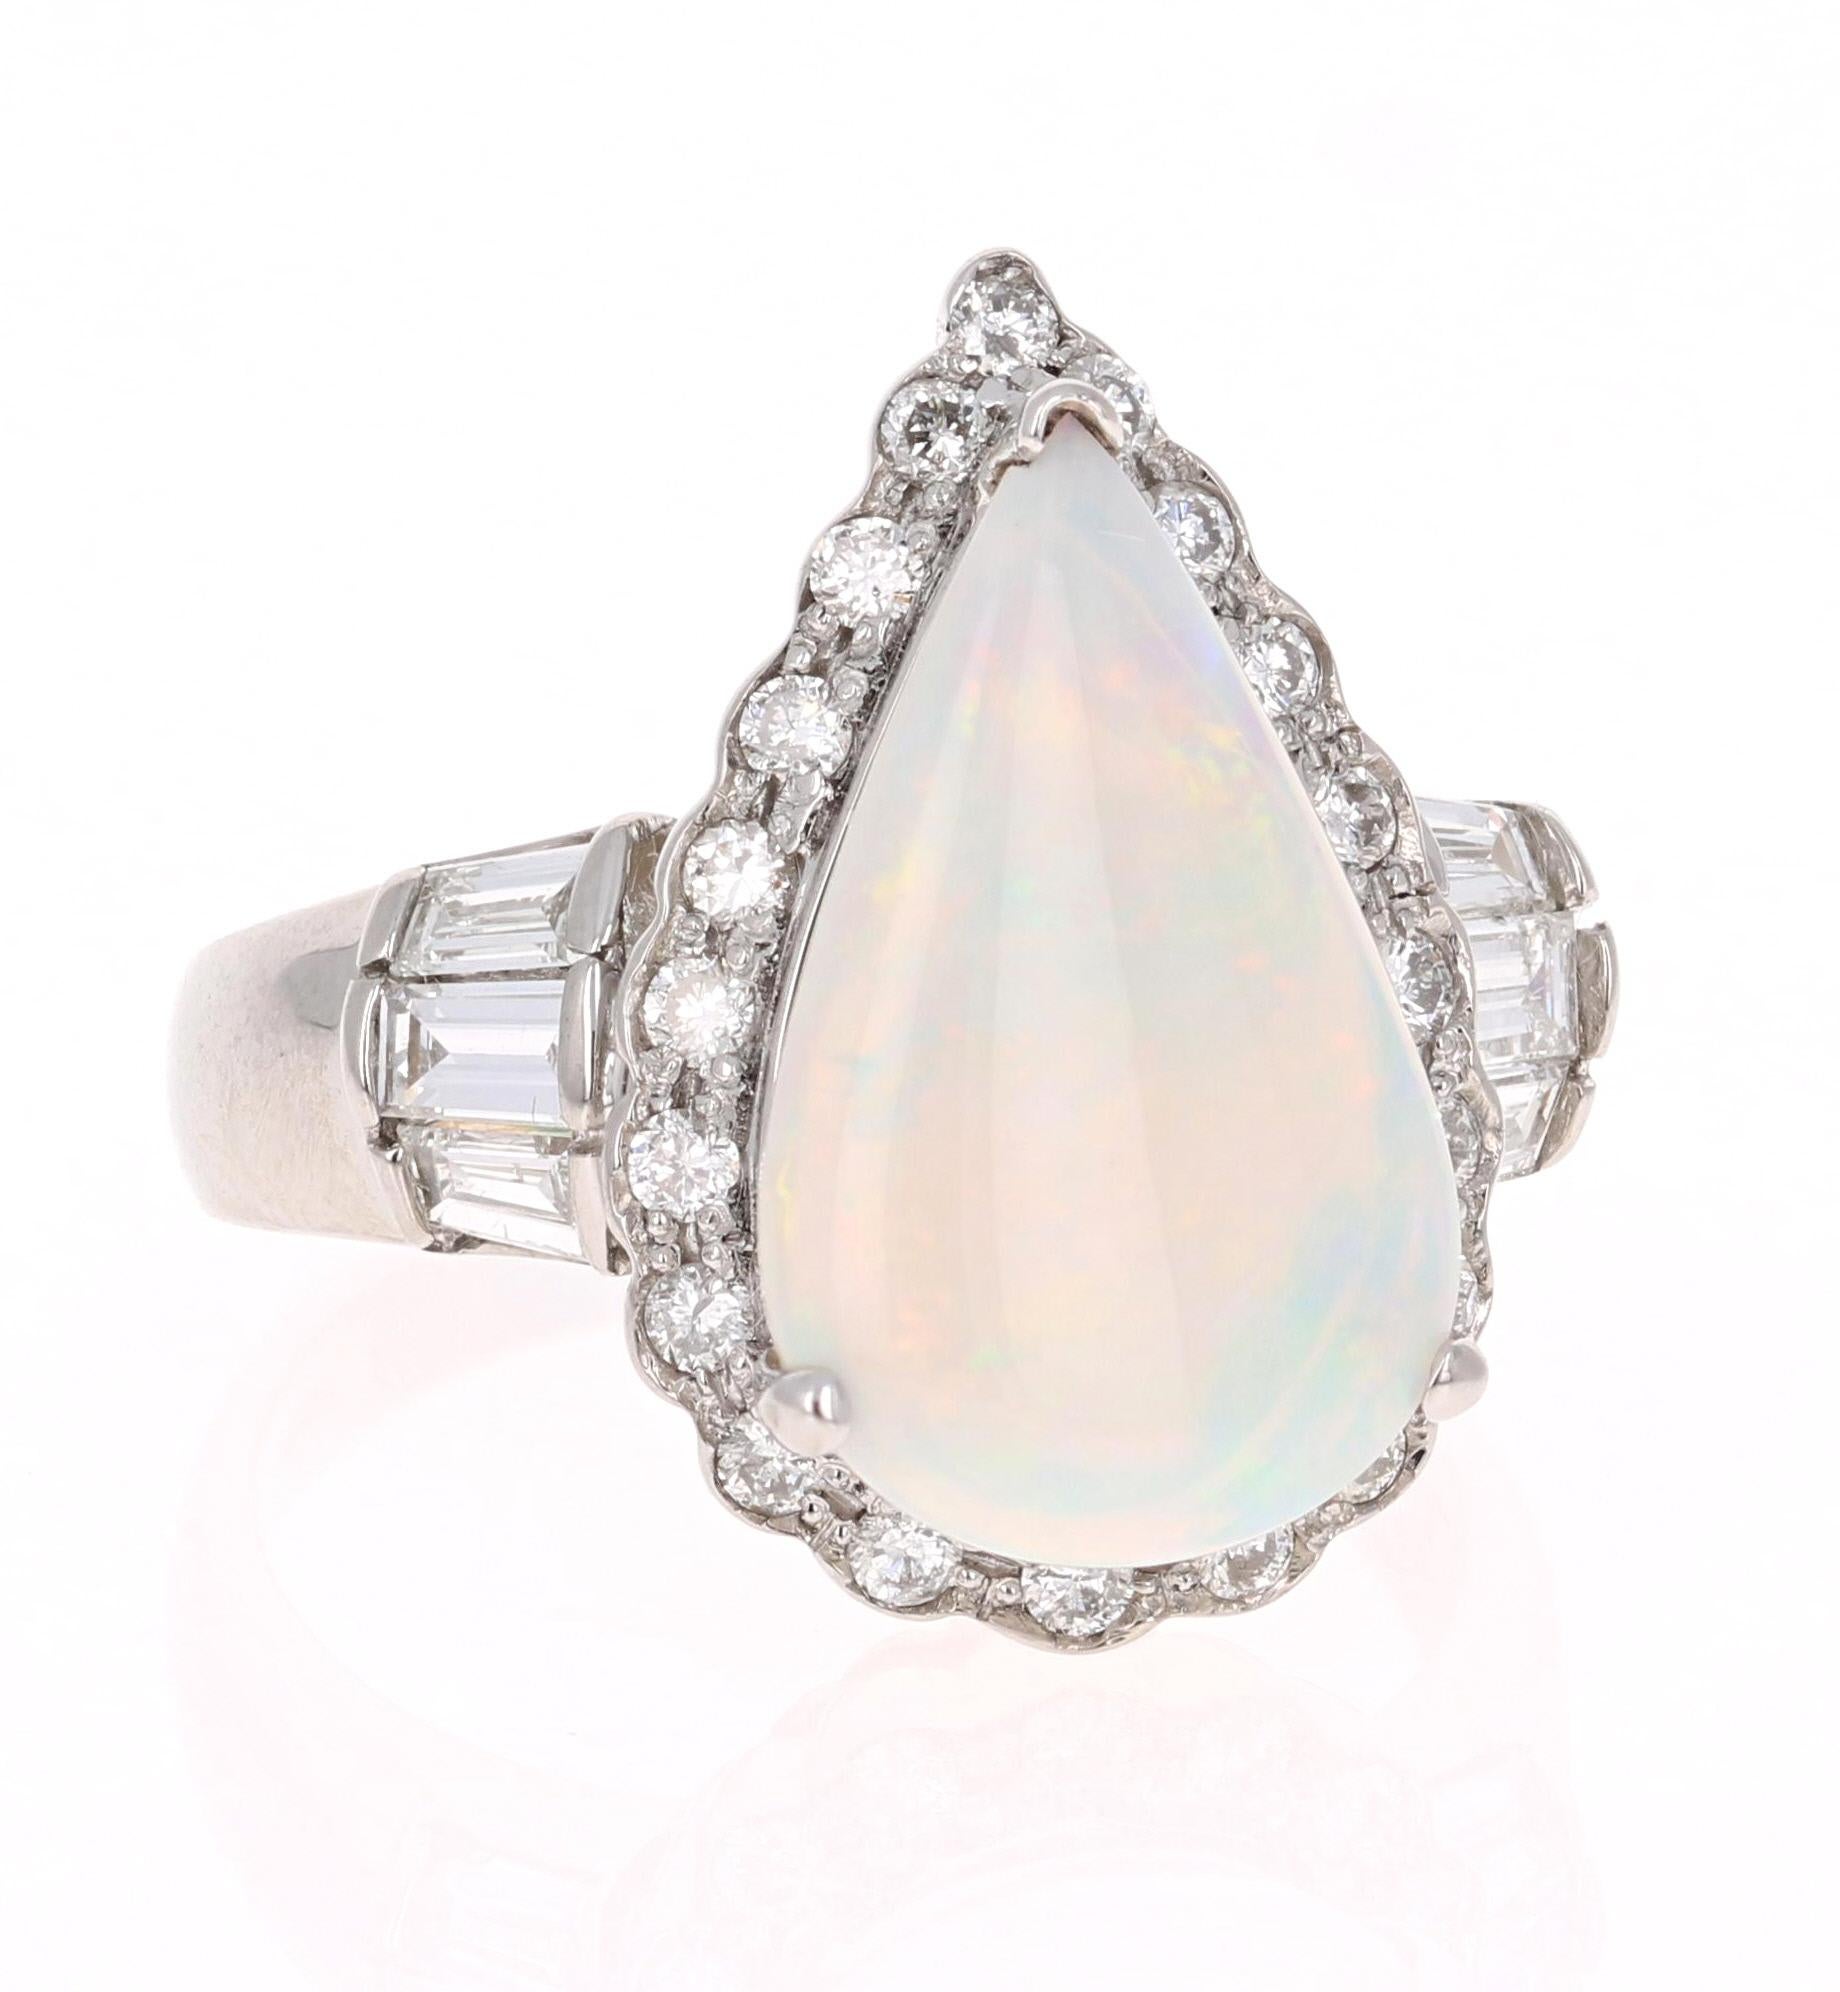 Stunning 3.25 Carat Opal and Diamond Ring that can easily transform into an Engagement Ring! 
There is a gorgeous 2.42 Carat Pear Cut Opal that is set in the center of the ring. It is surrounded by 20 Round Cut Diamonds that weigh 0.33 carat and 6